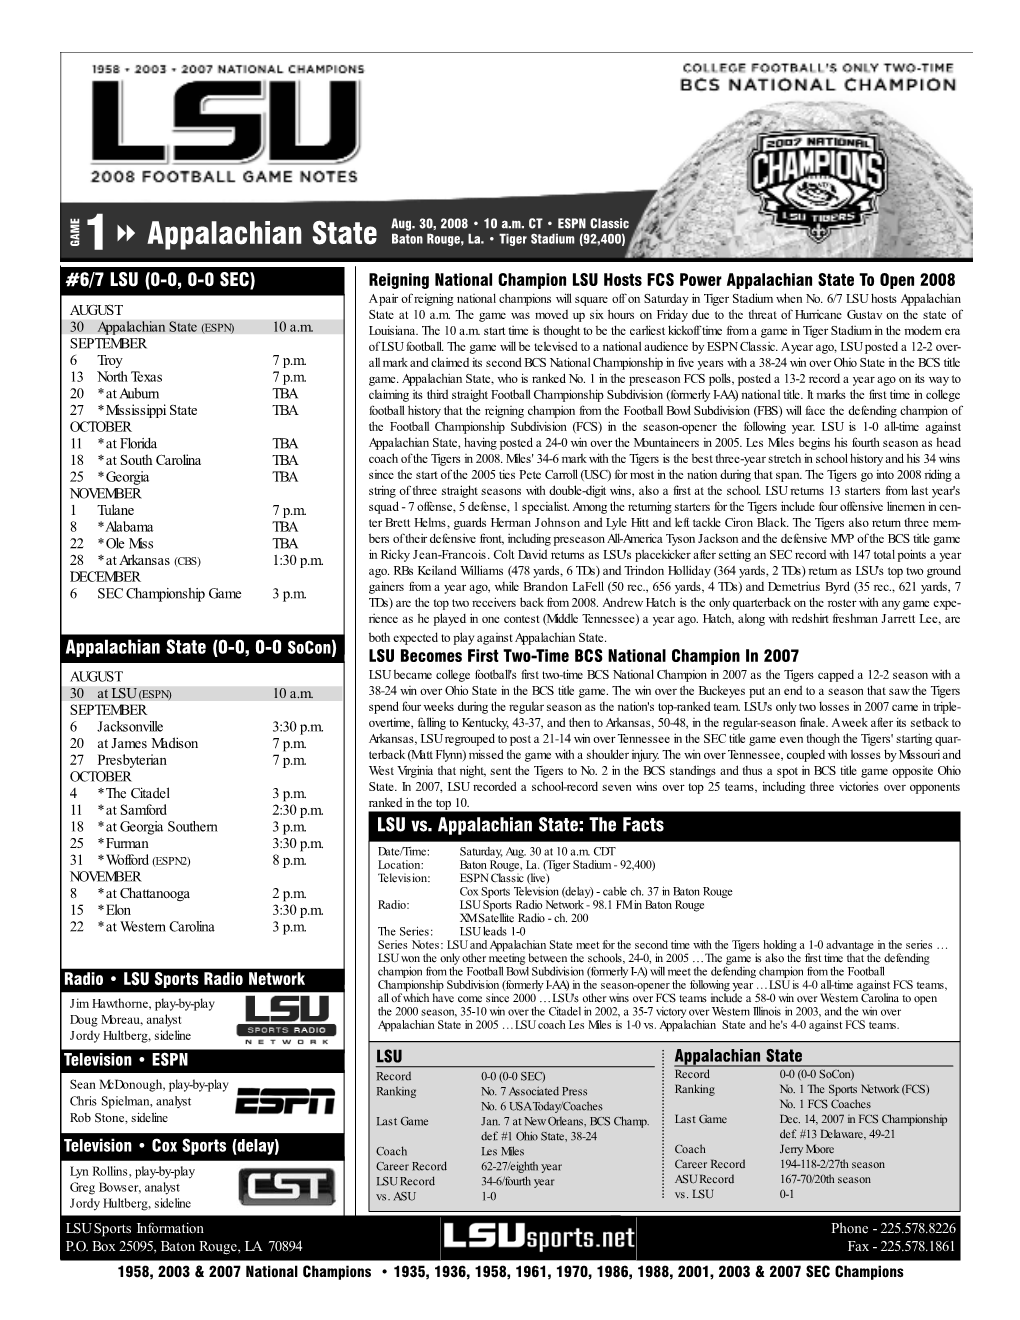 Game 1 Notes Vs Appalachian State